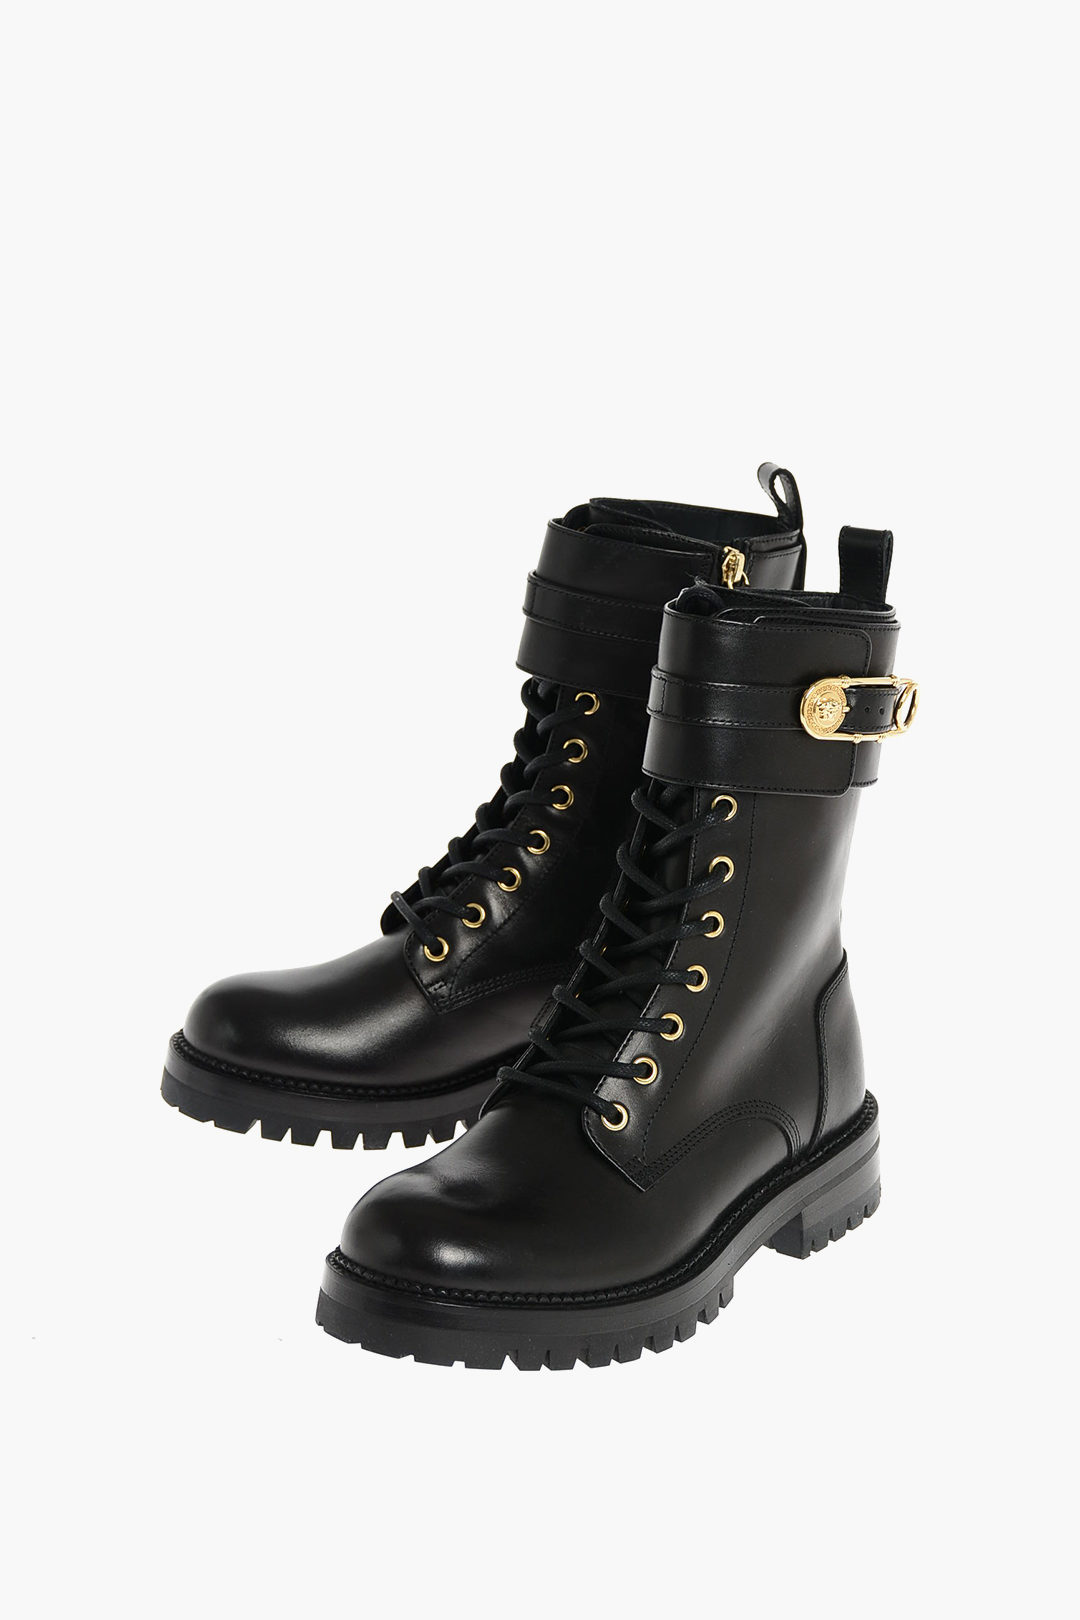 Versace Army Boots | giant-discovery.com